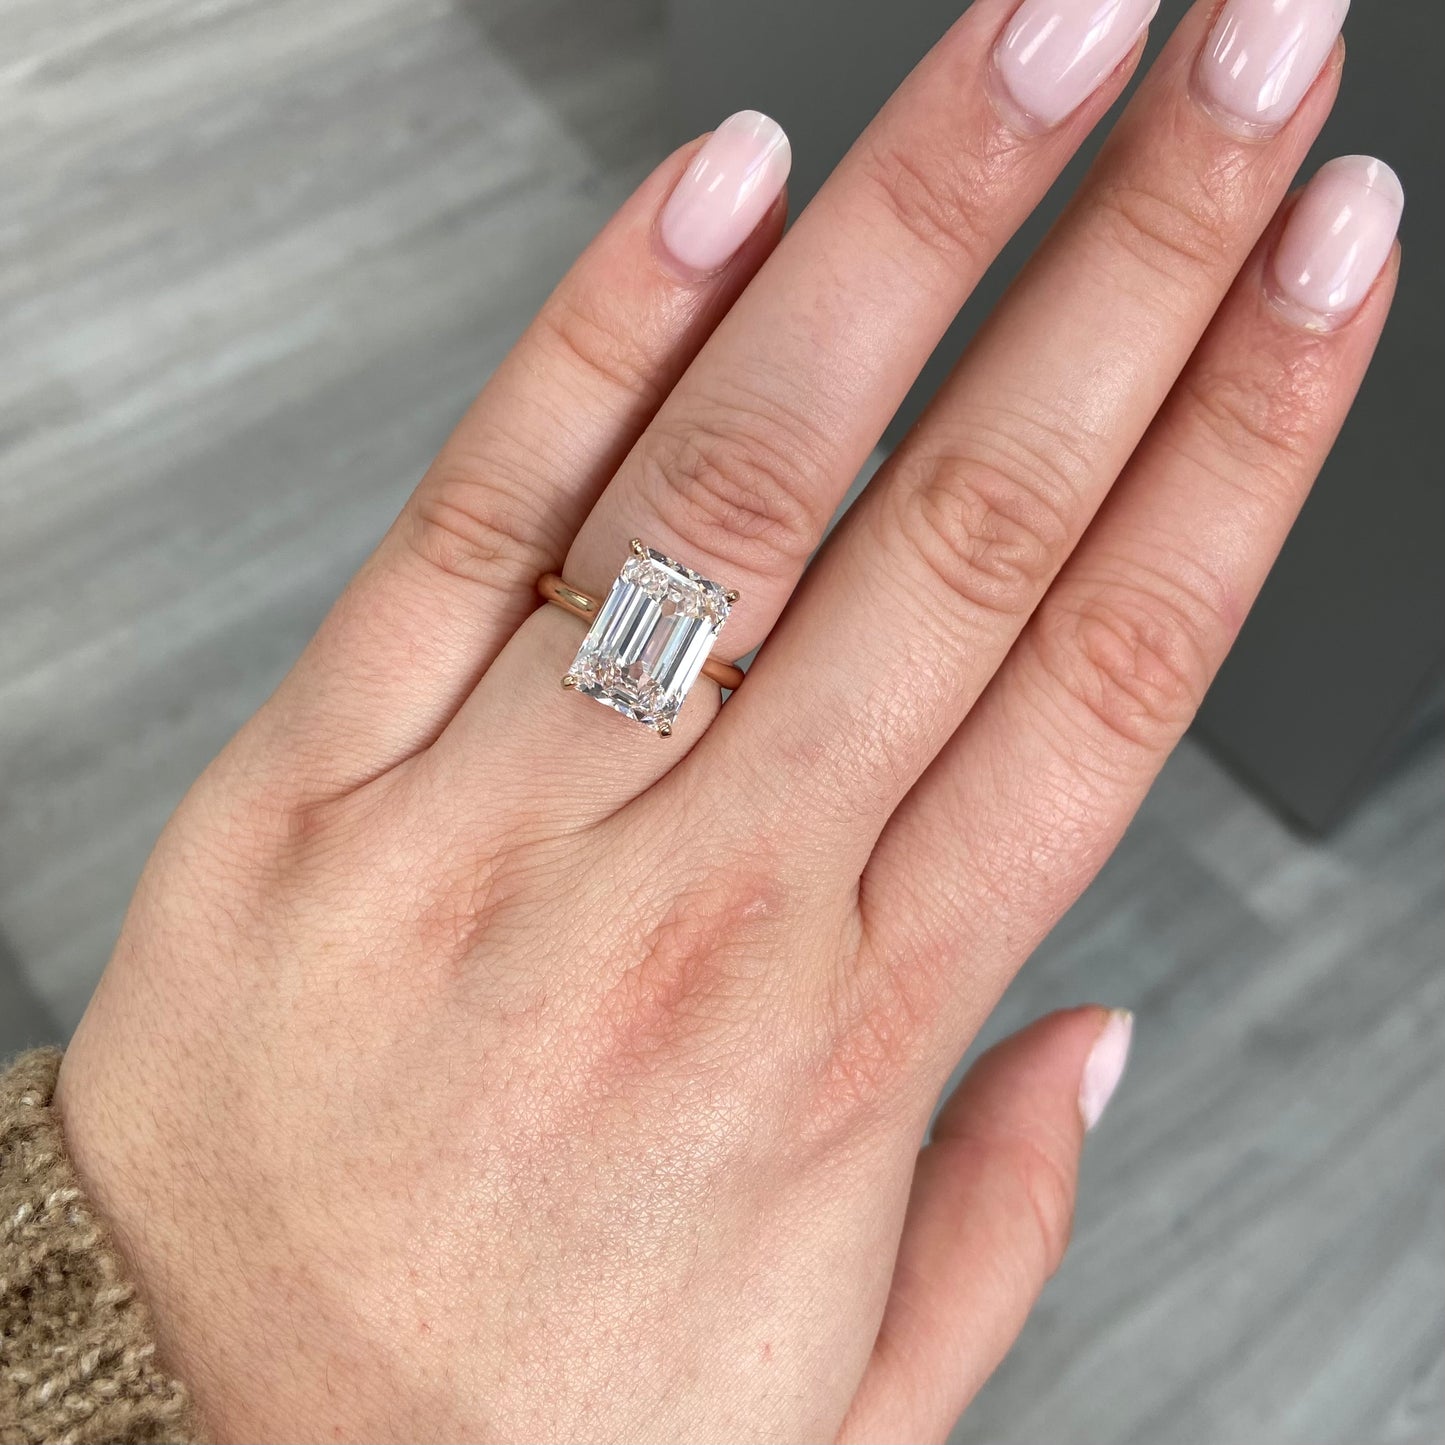 6.02 Carat Emerald Cut Diamond Ring GIA Certified Diamond Very Light Pink Internally Flawless Clarity Type IIa Diamond, meaning the diamond is totally devoid of impurities. See the certification enclosed. This is extremely rare and highly sought after by collectors  Handcrafted in 18k Rose Gold in NYC